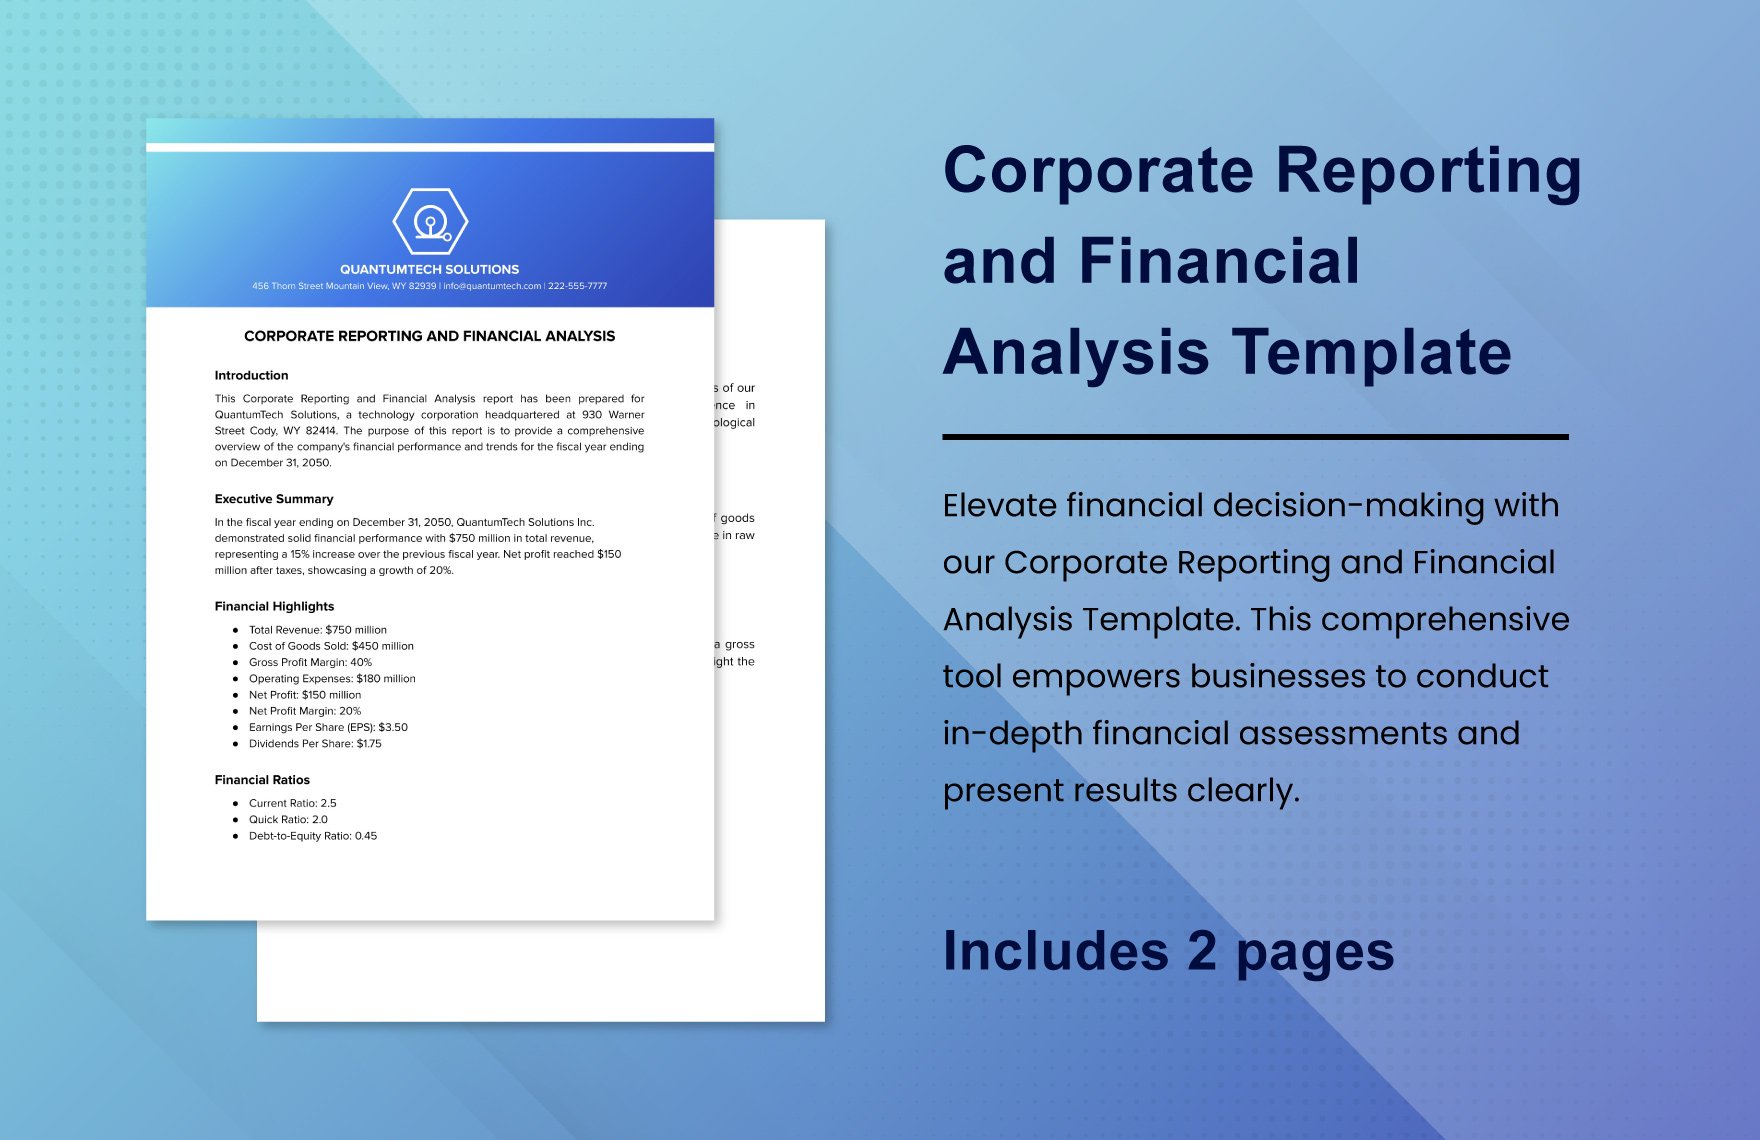 Corporate Reporting and Financial Analysis Template